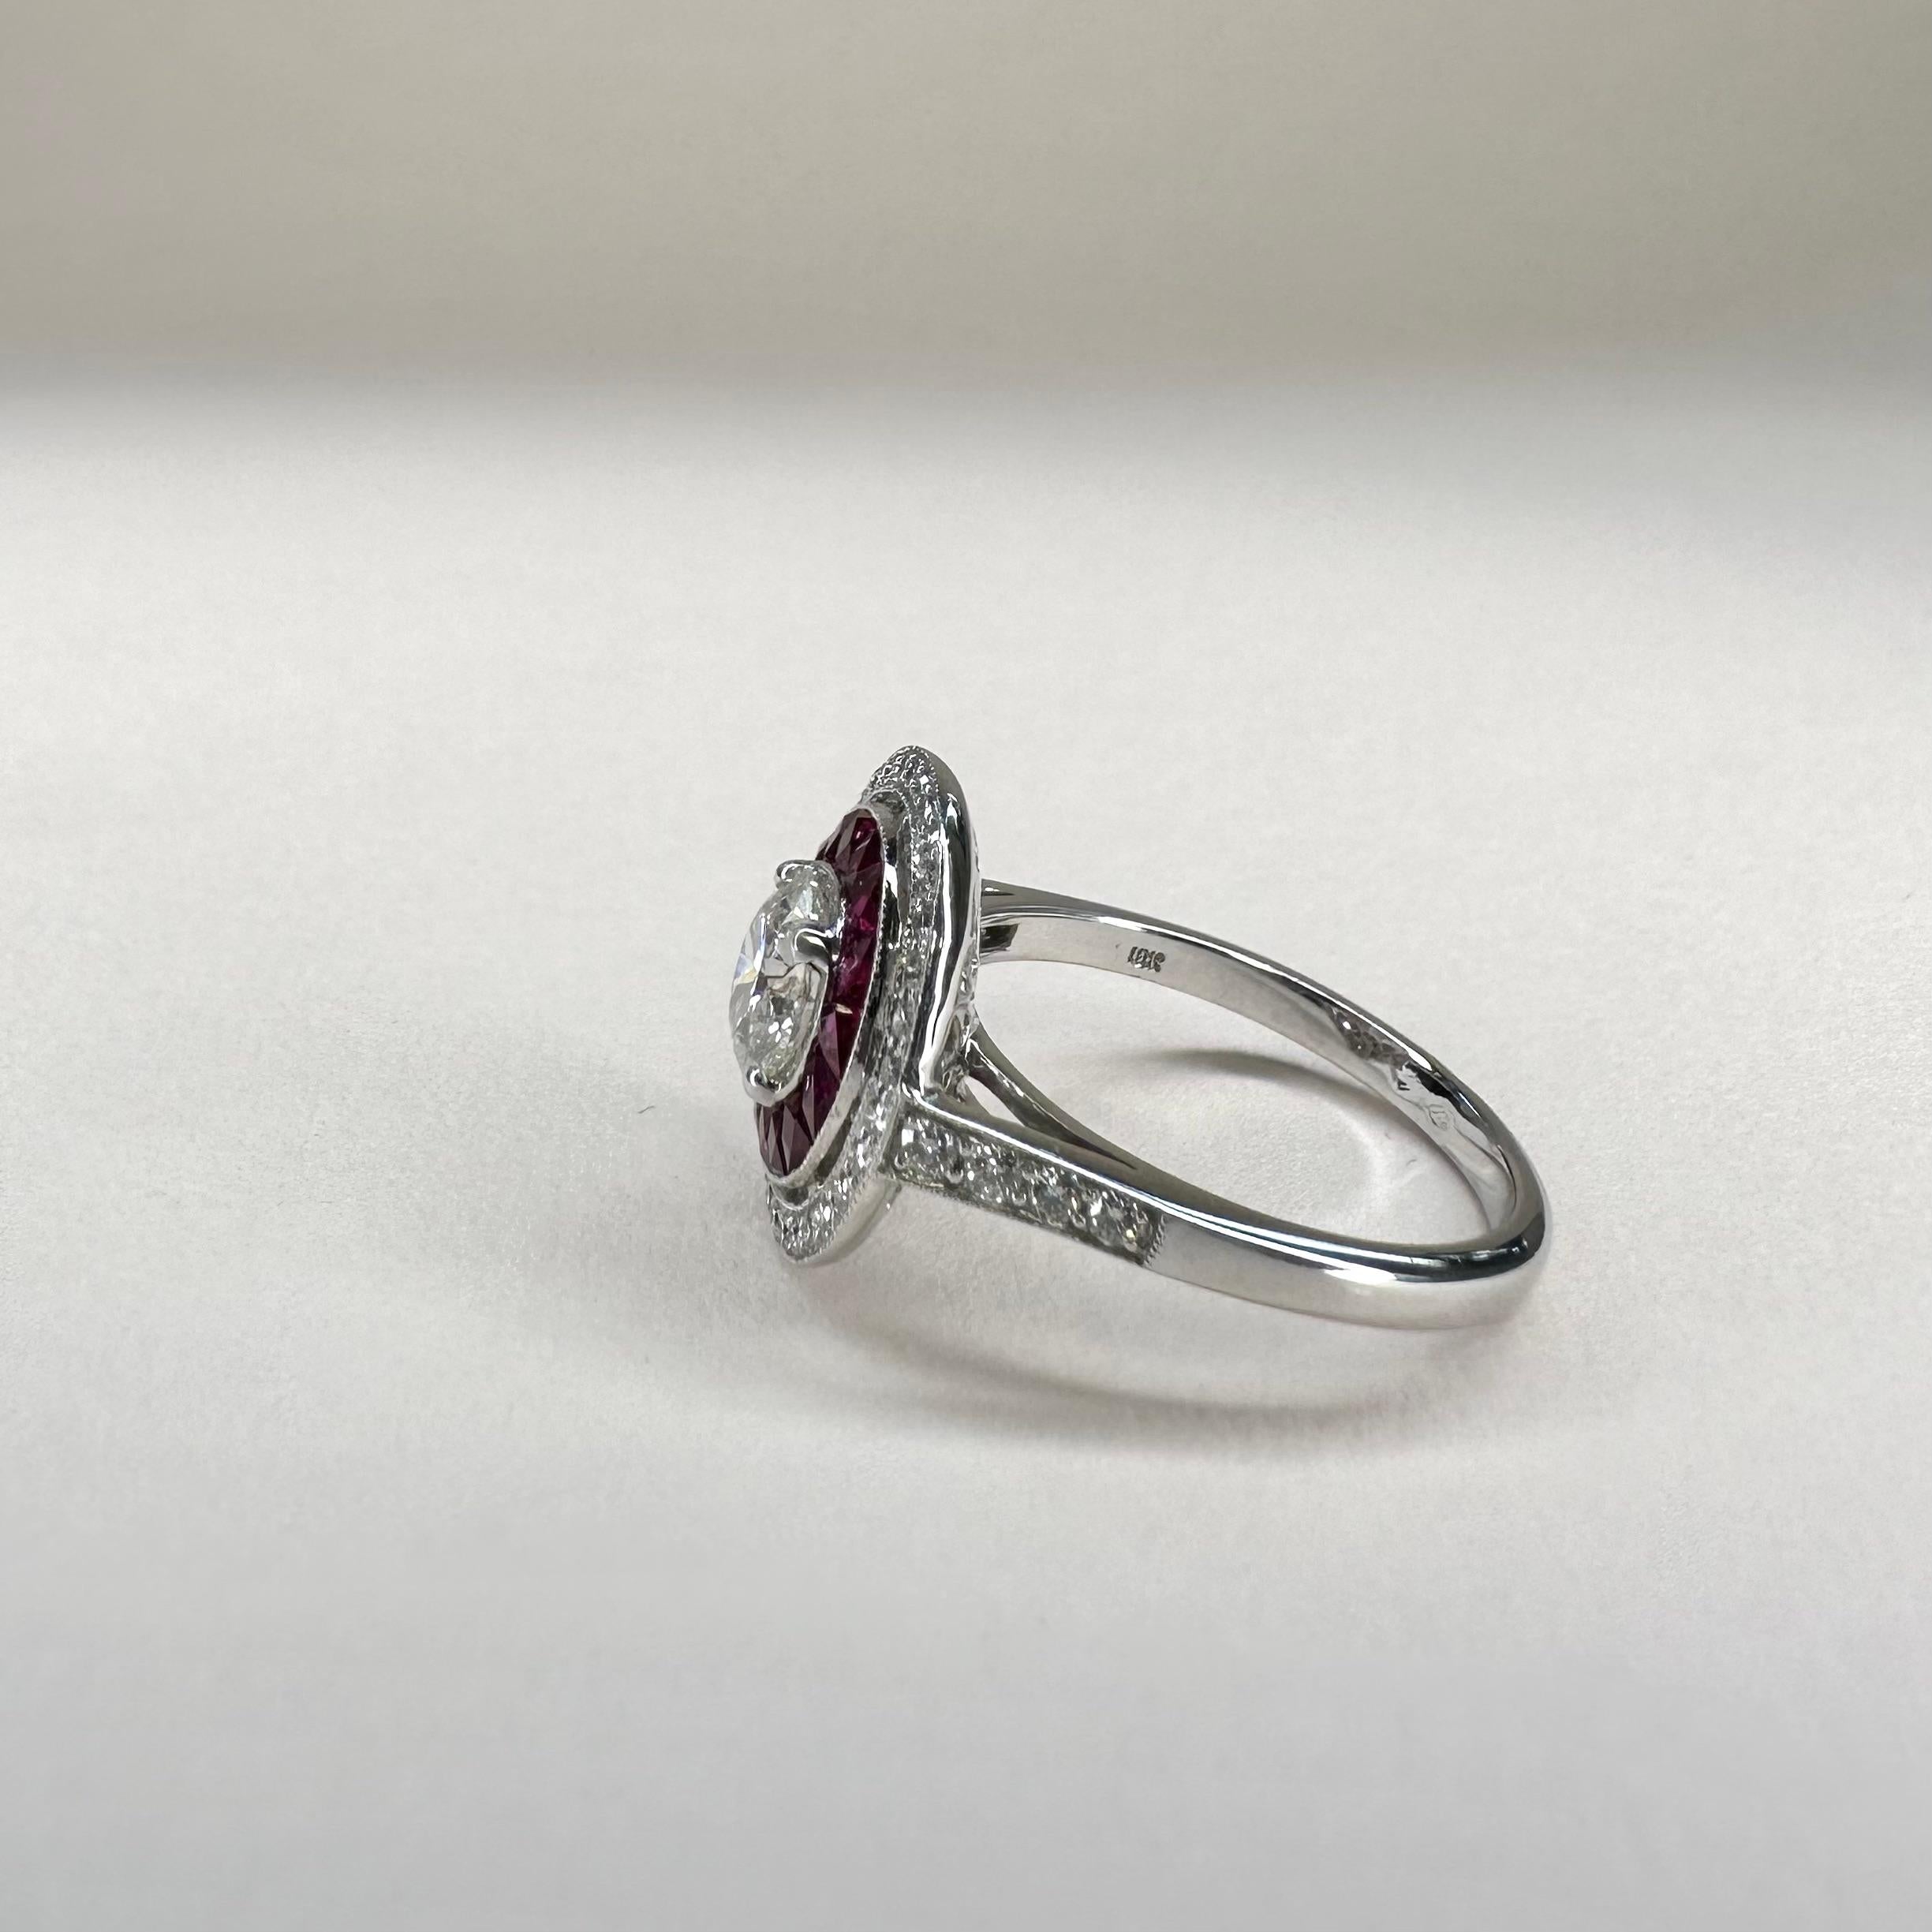 For Sale:  Art Deco Platinum 0.65 Cts Calibre Cut Ruby and 0.77 Ct Diamond GIA Certified 6